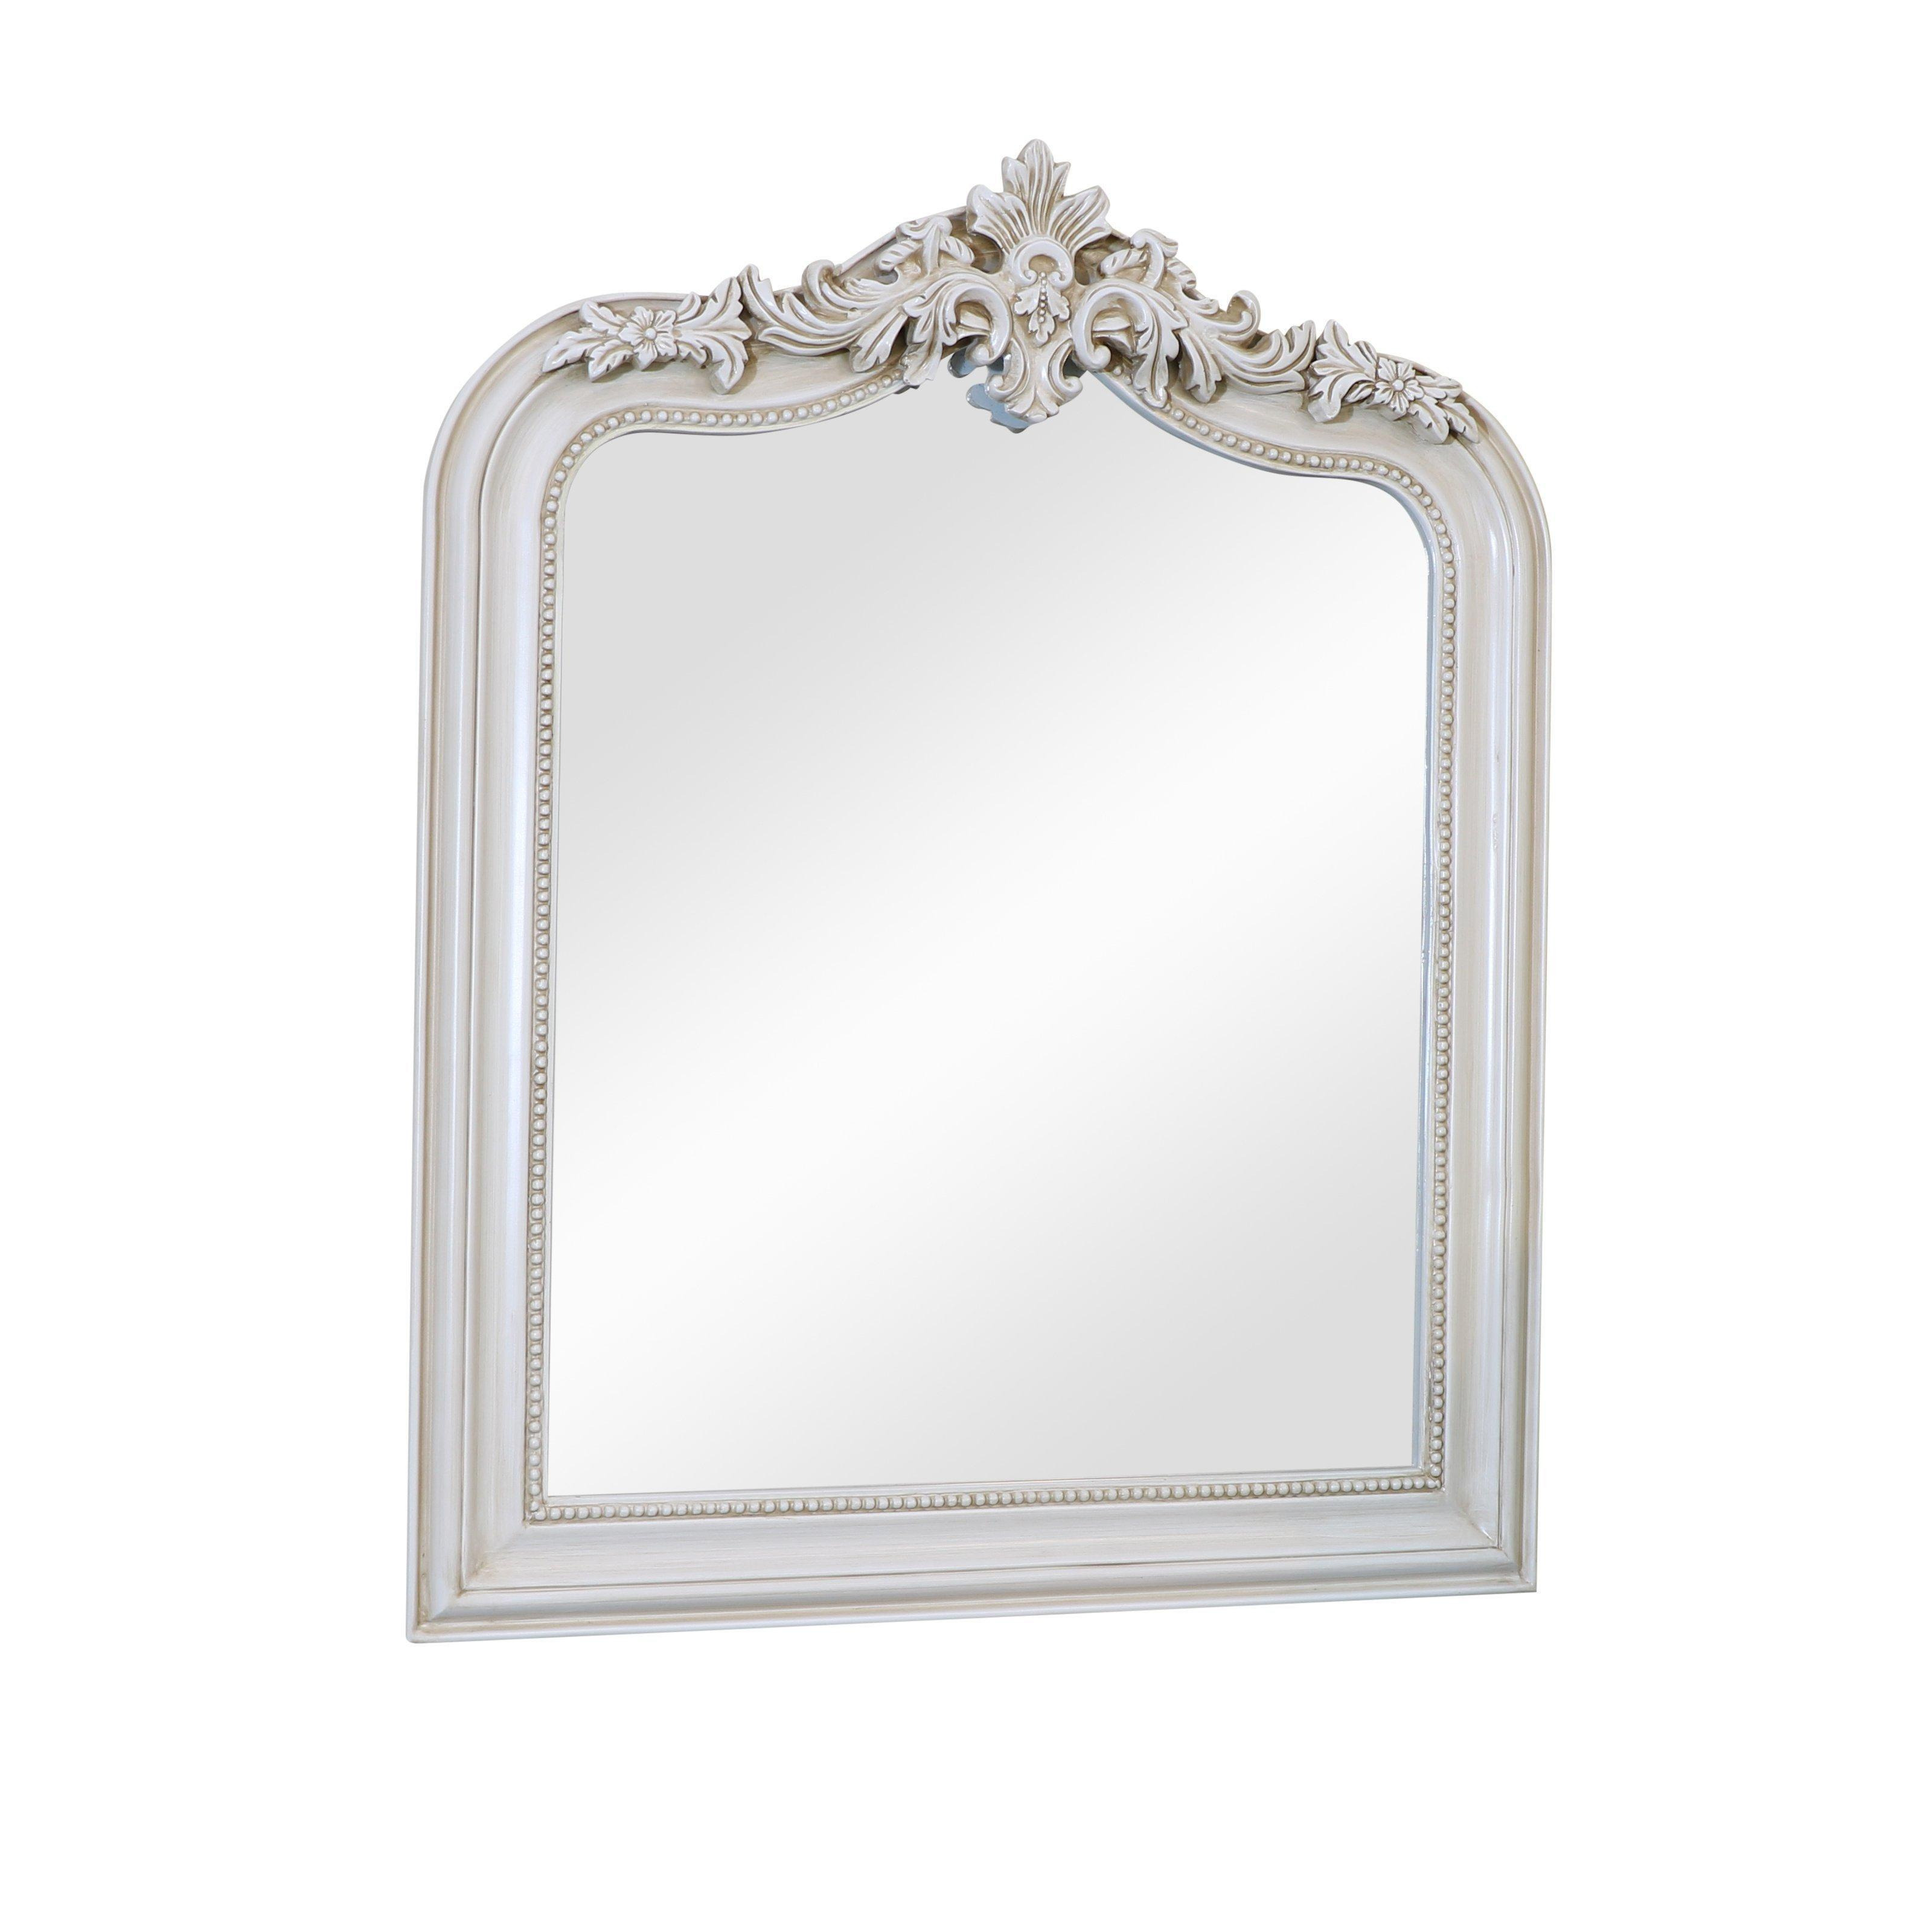 Ornate Arched Antiqued Ivory Wall Mirror 100 Cm X 80cm - image 1